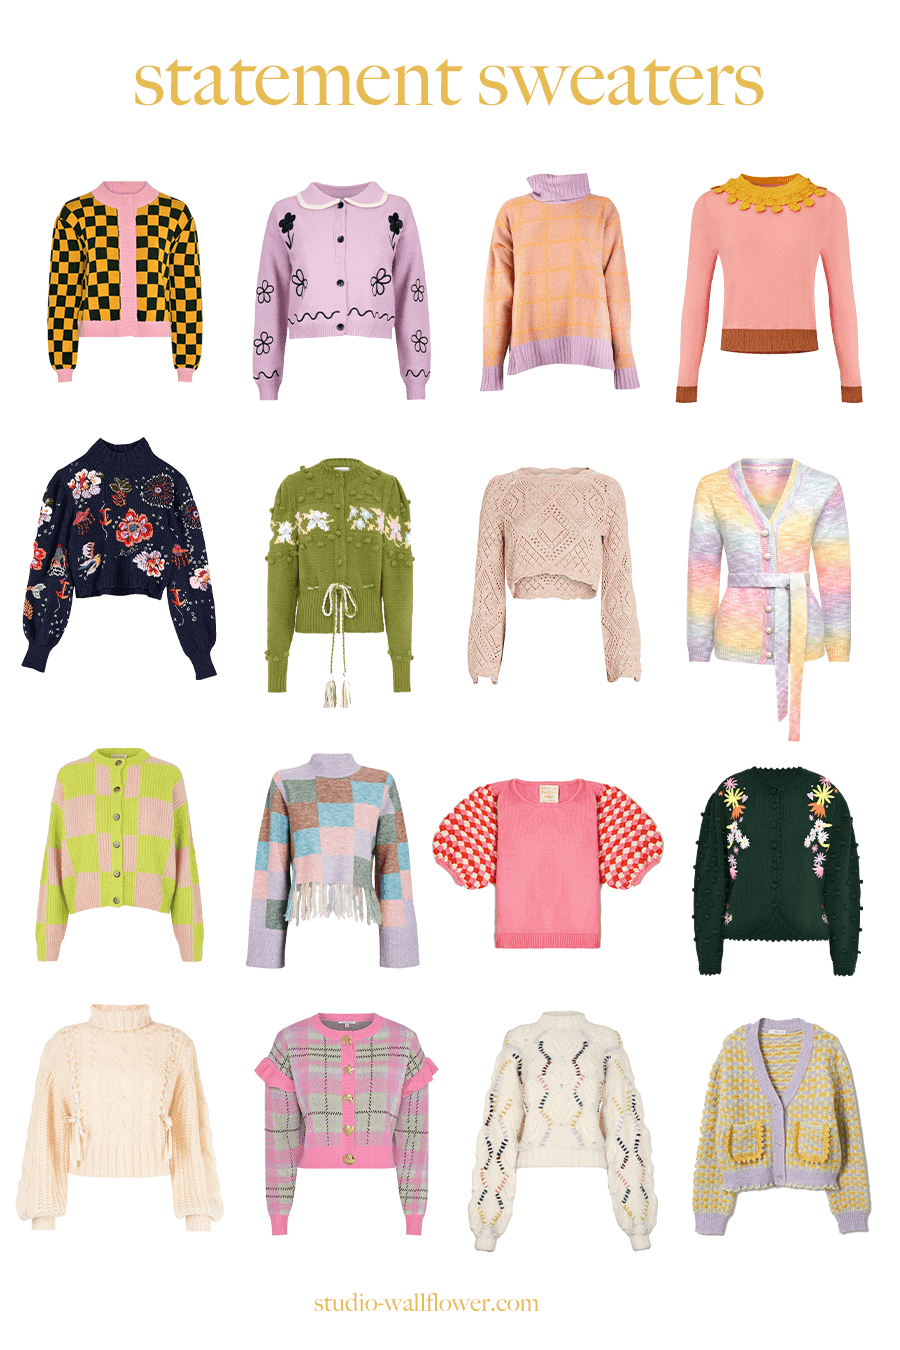 16 Candy Colored Statement Sweaters for Fall via wallflower